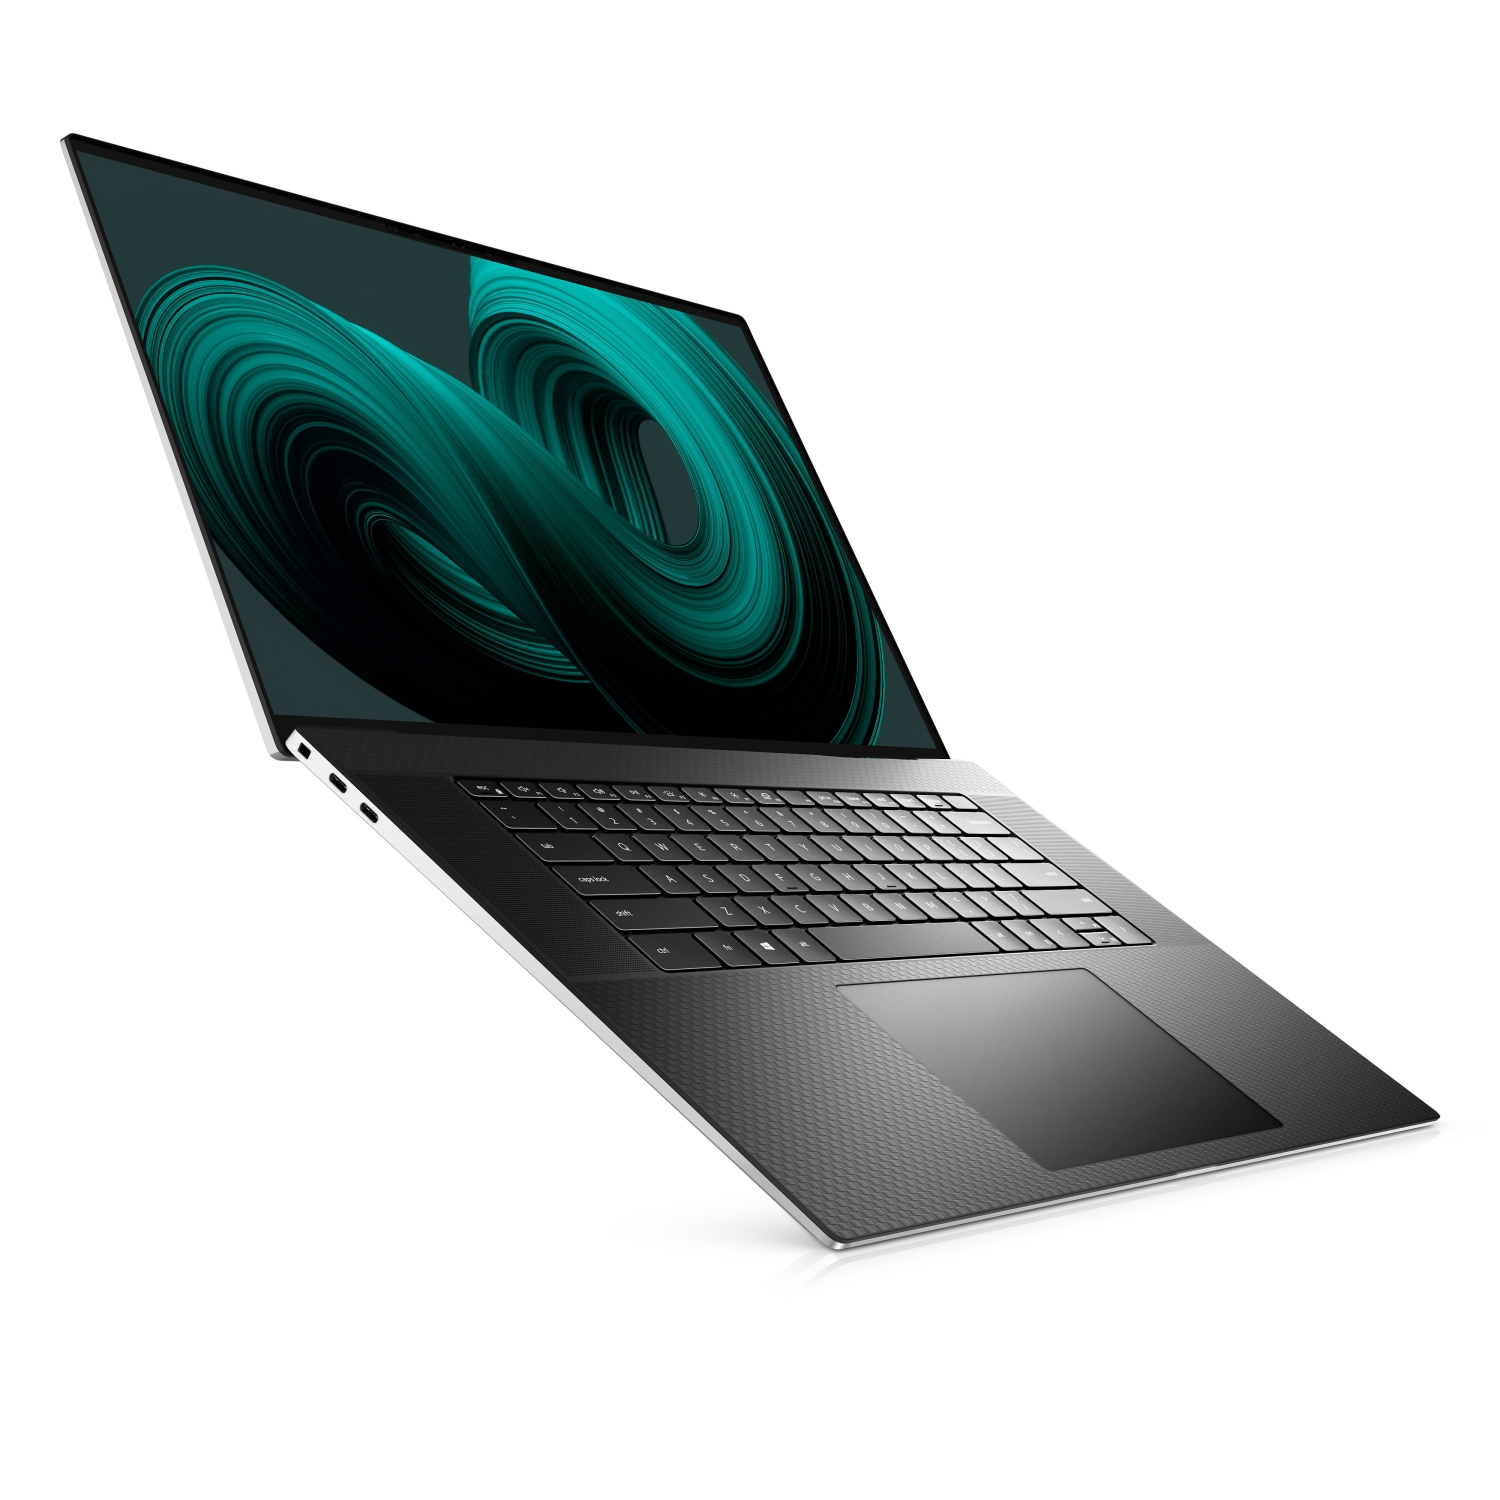 Refurbished (Excellent) - Dell XPS 17 9710 Laptop (2021), 17" 4K Touch, Core i7 - 512GB SSD - 32GB RAM - RTX 3060, 8 Cores @ 4.6 GHz - 11th Gen CPU Certified Refurbished